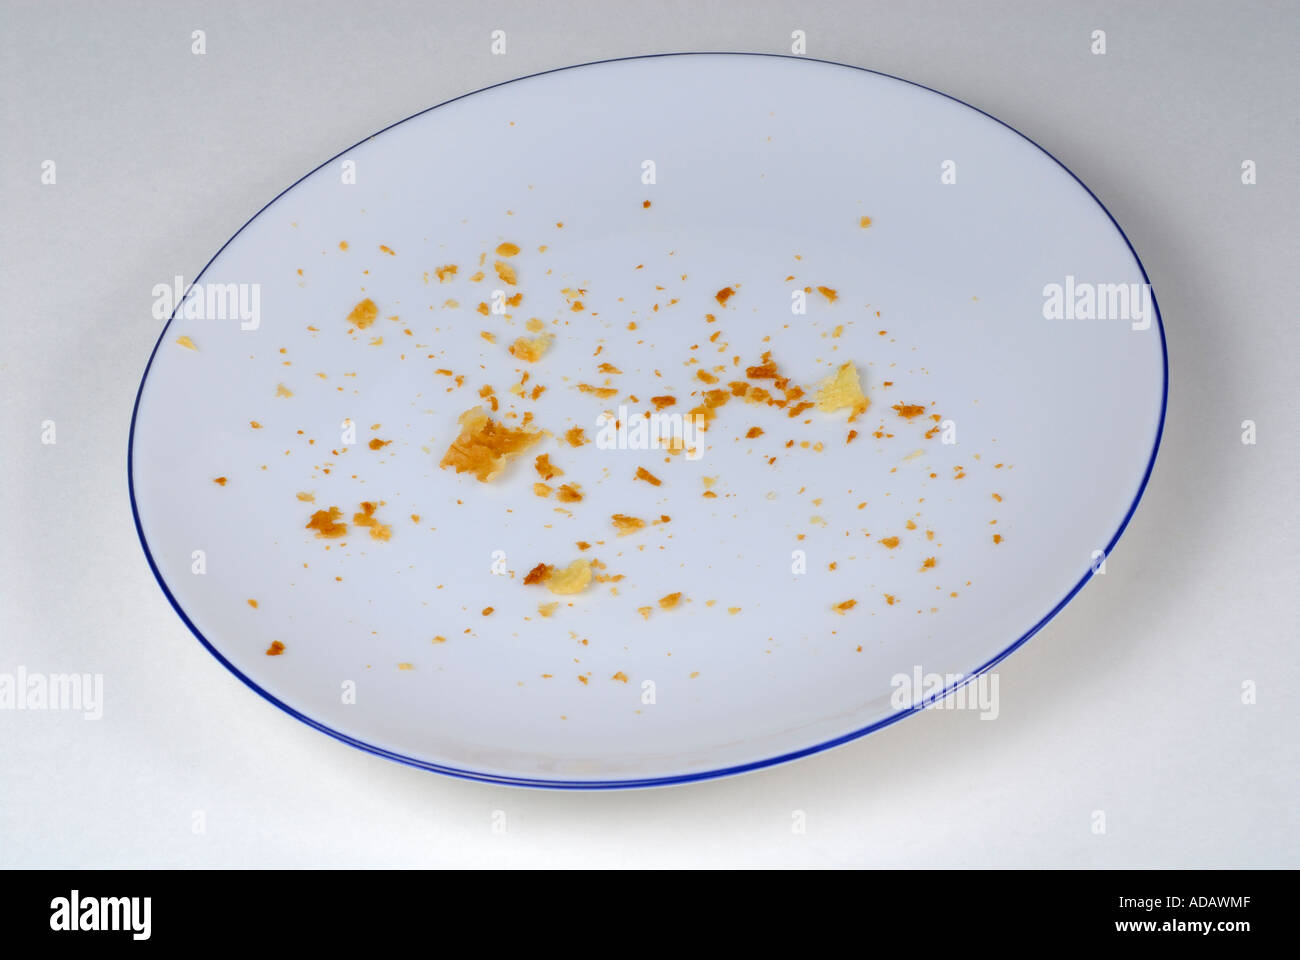 Crumbs on an empty plate Stock Photo